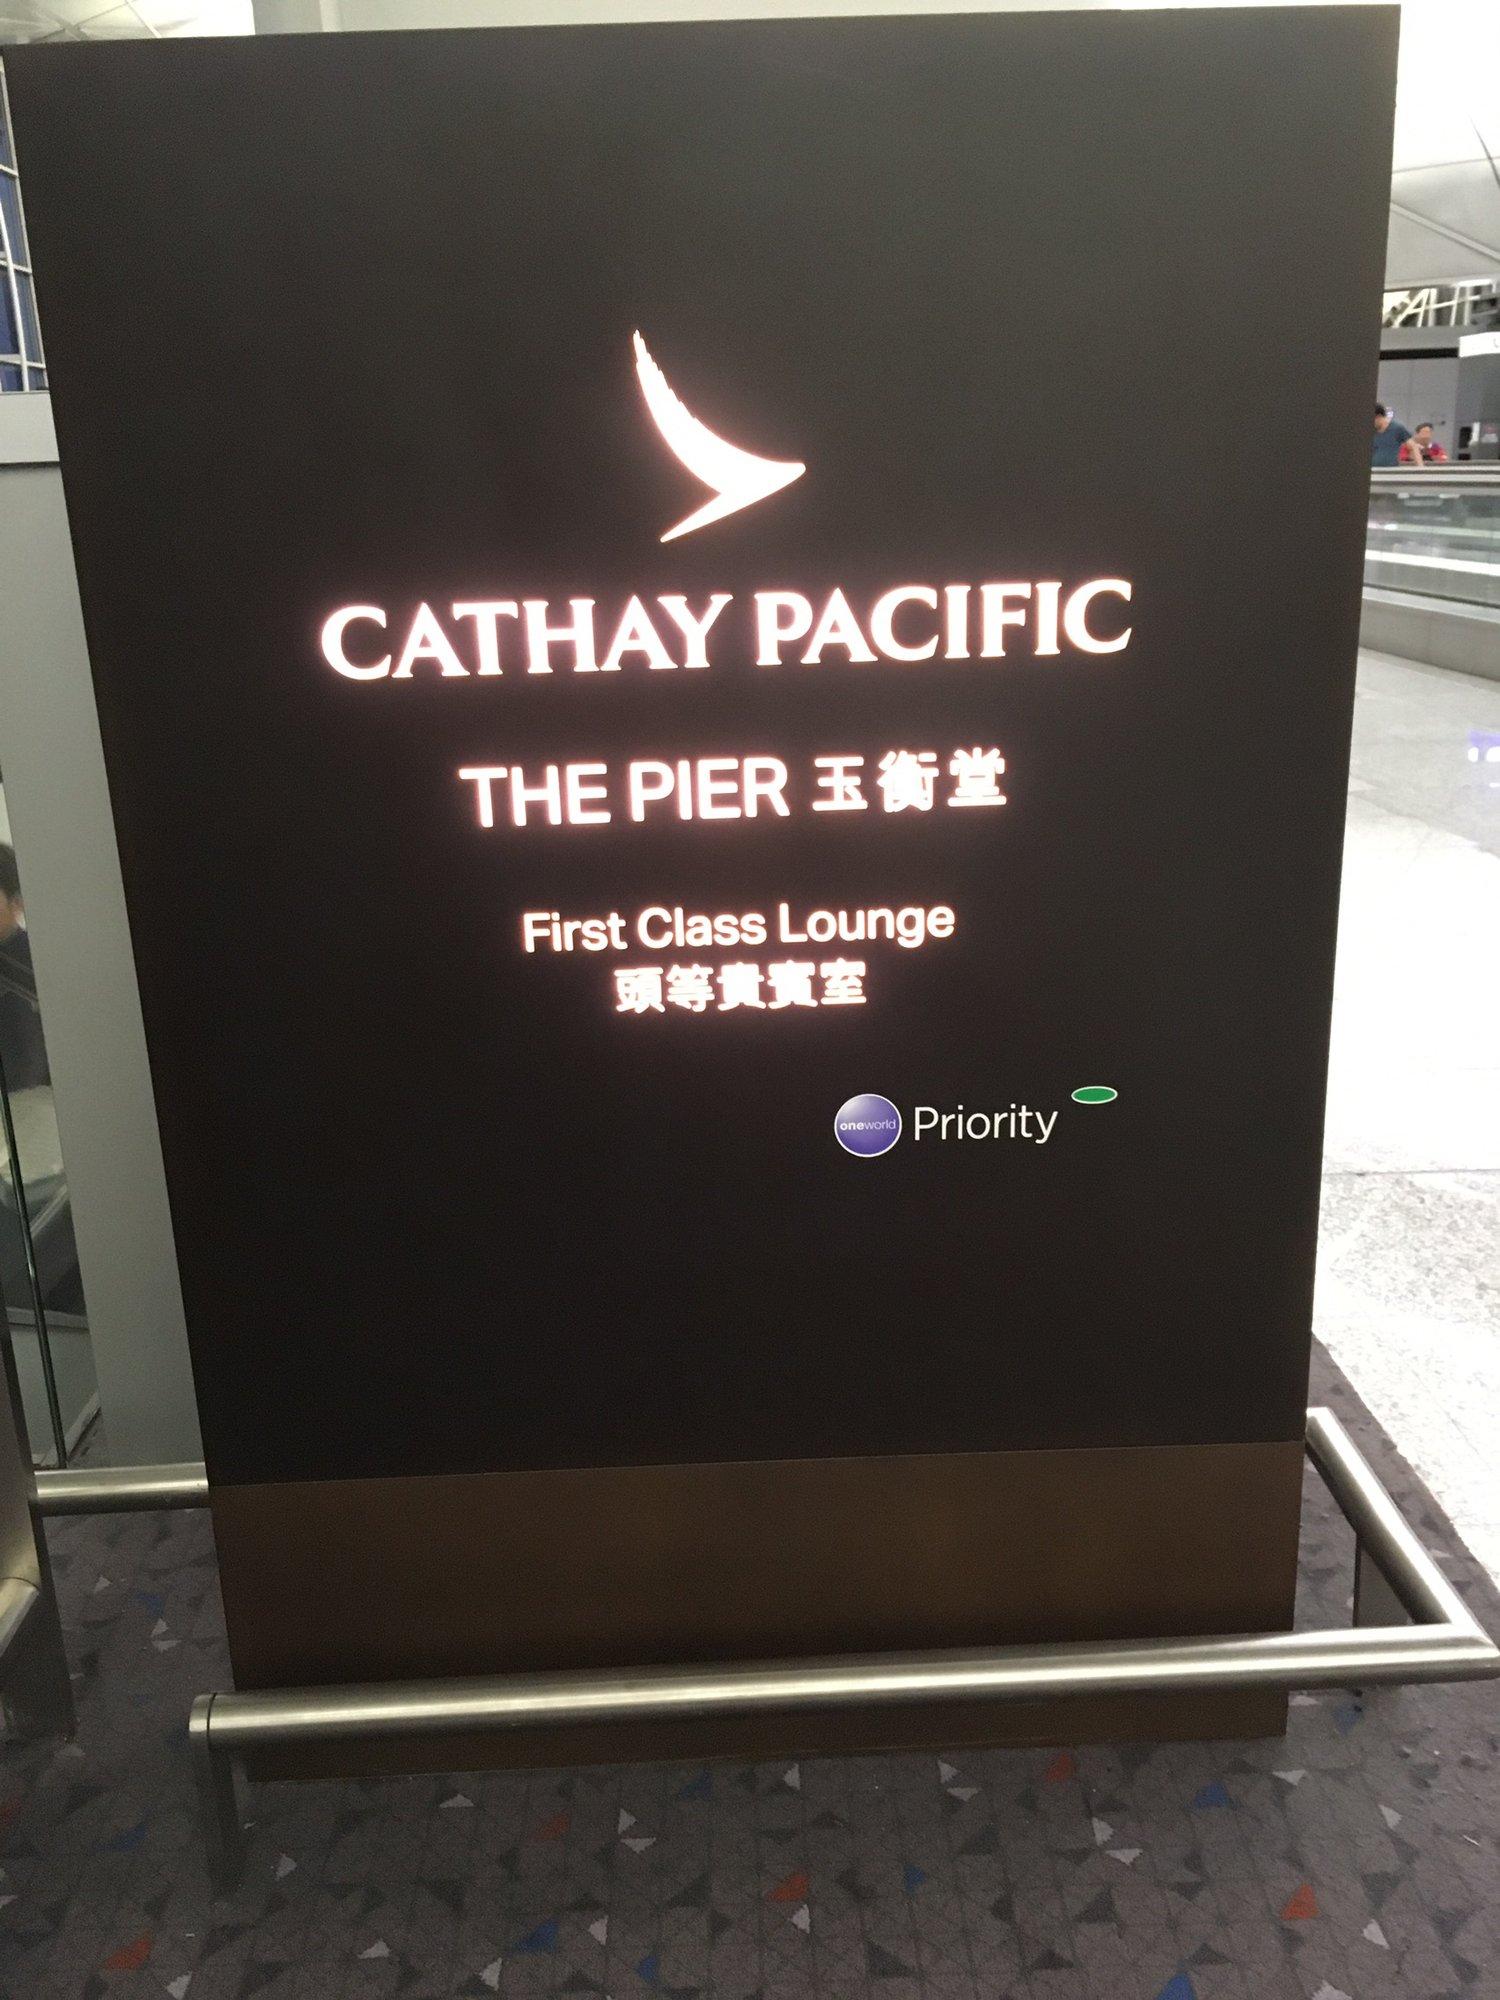 Cathay Pacific The Pier First Class Lounge image 71 of 100